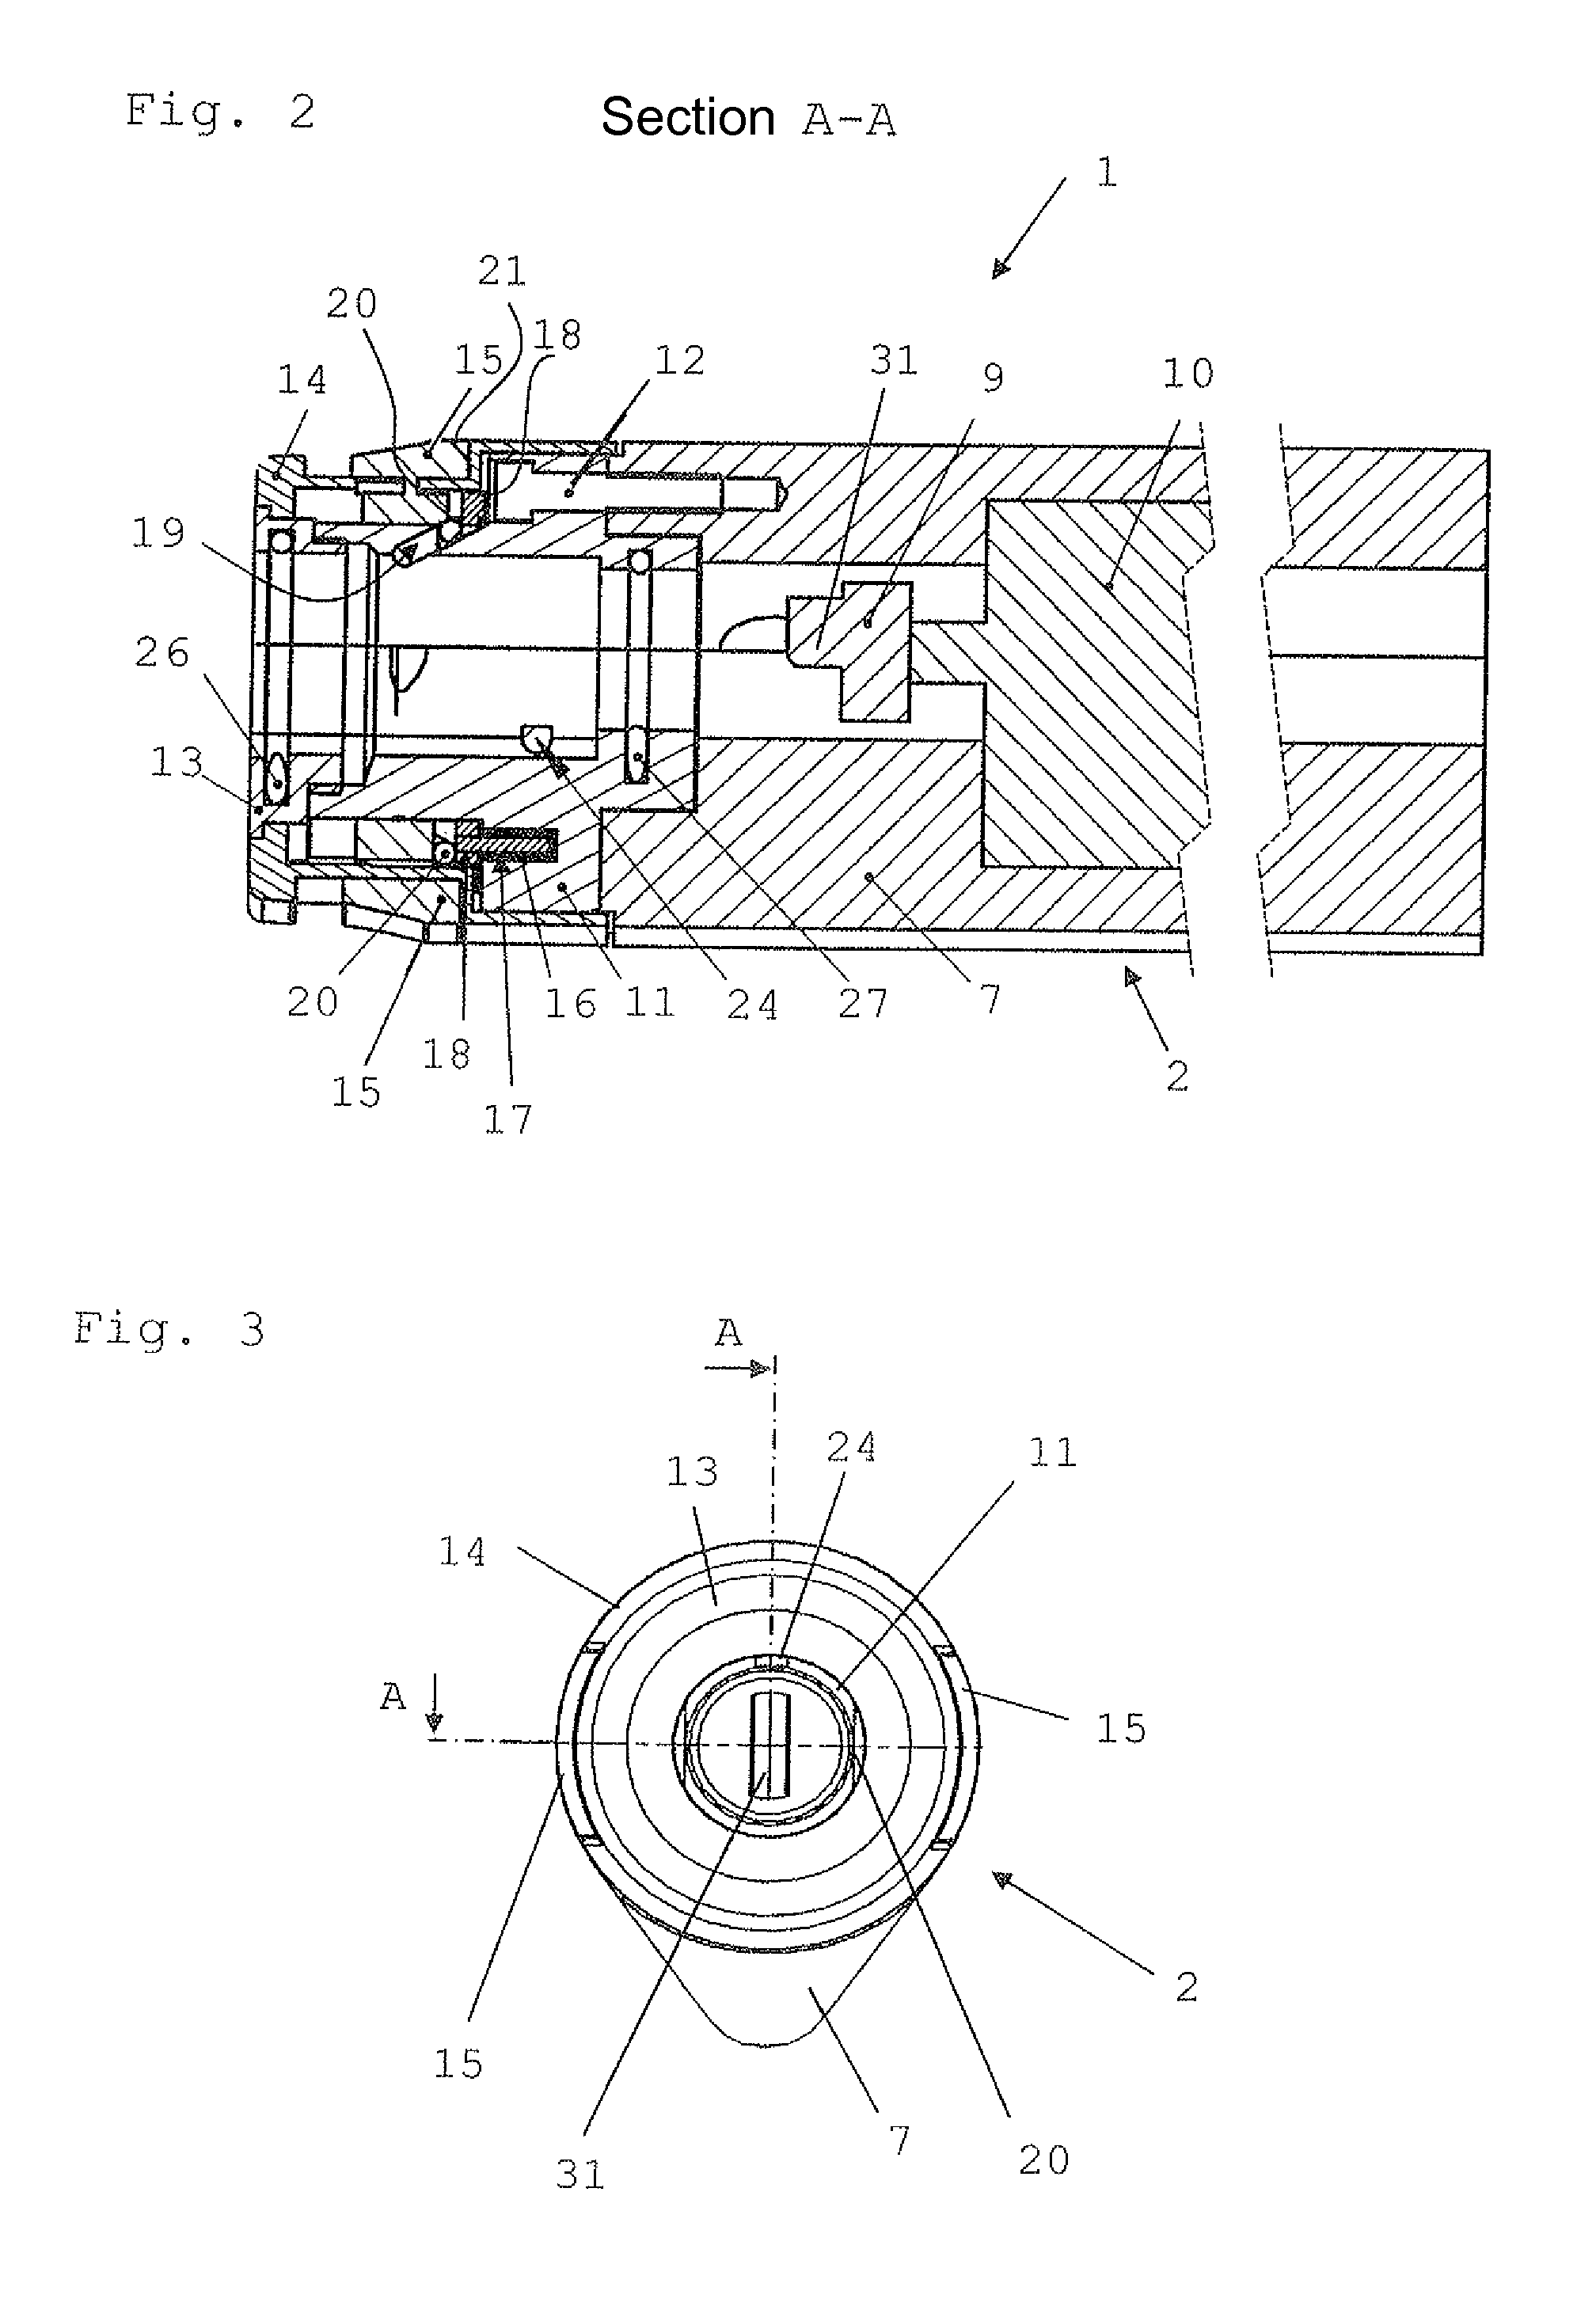 Surgical instrument for detachably connecting a handpiece to a surgical tool